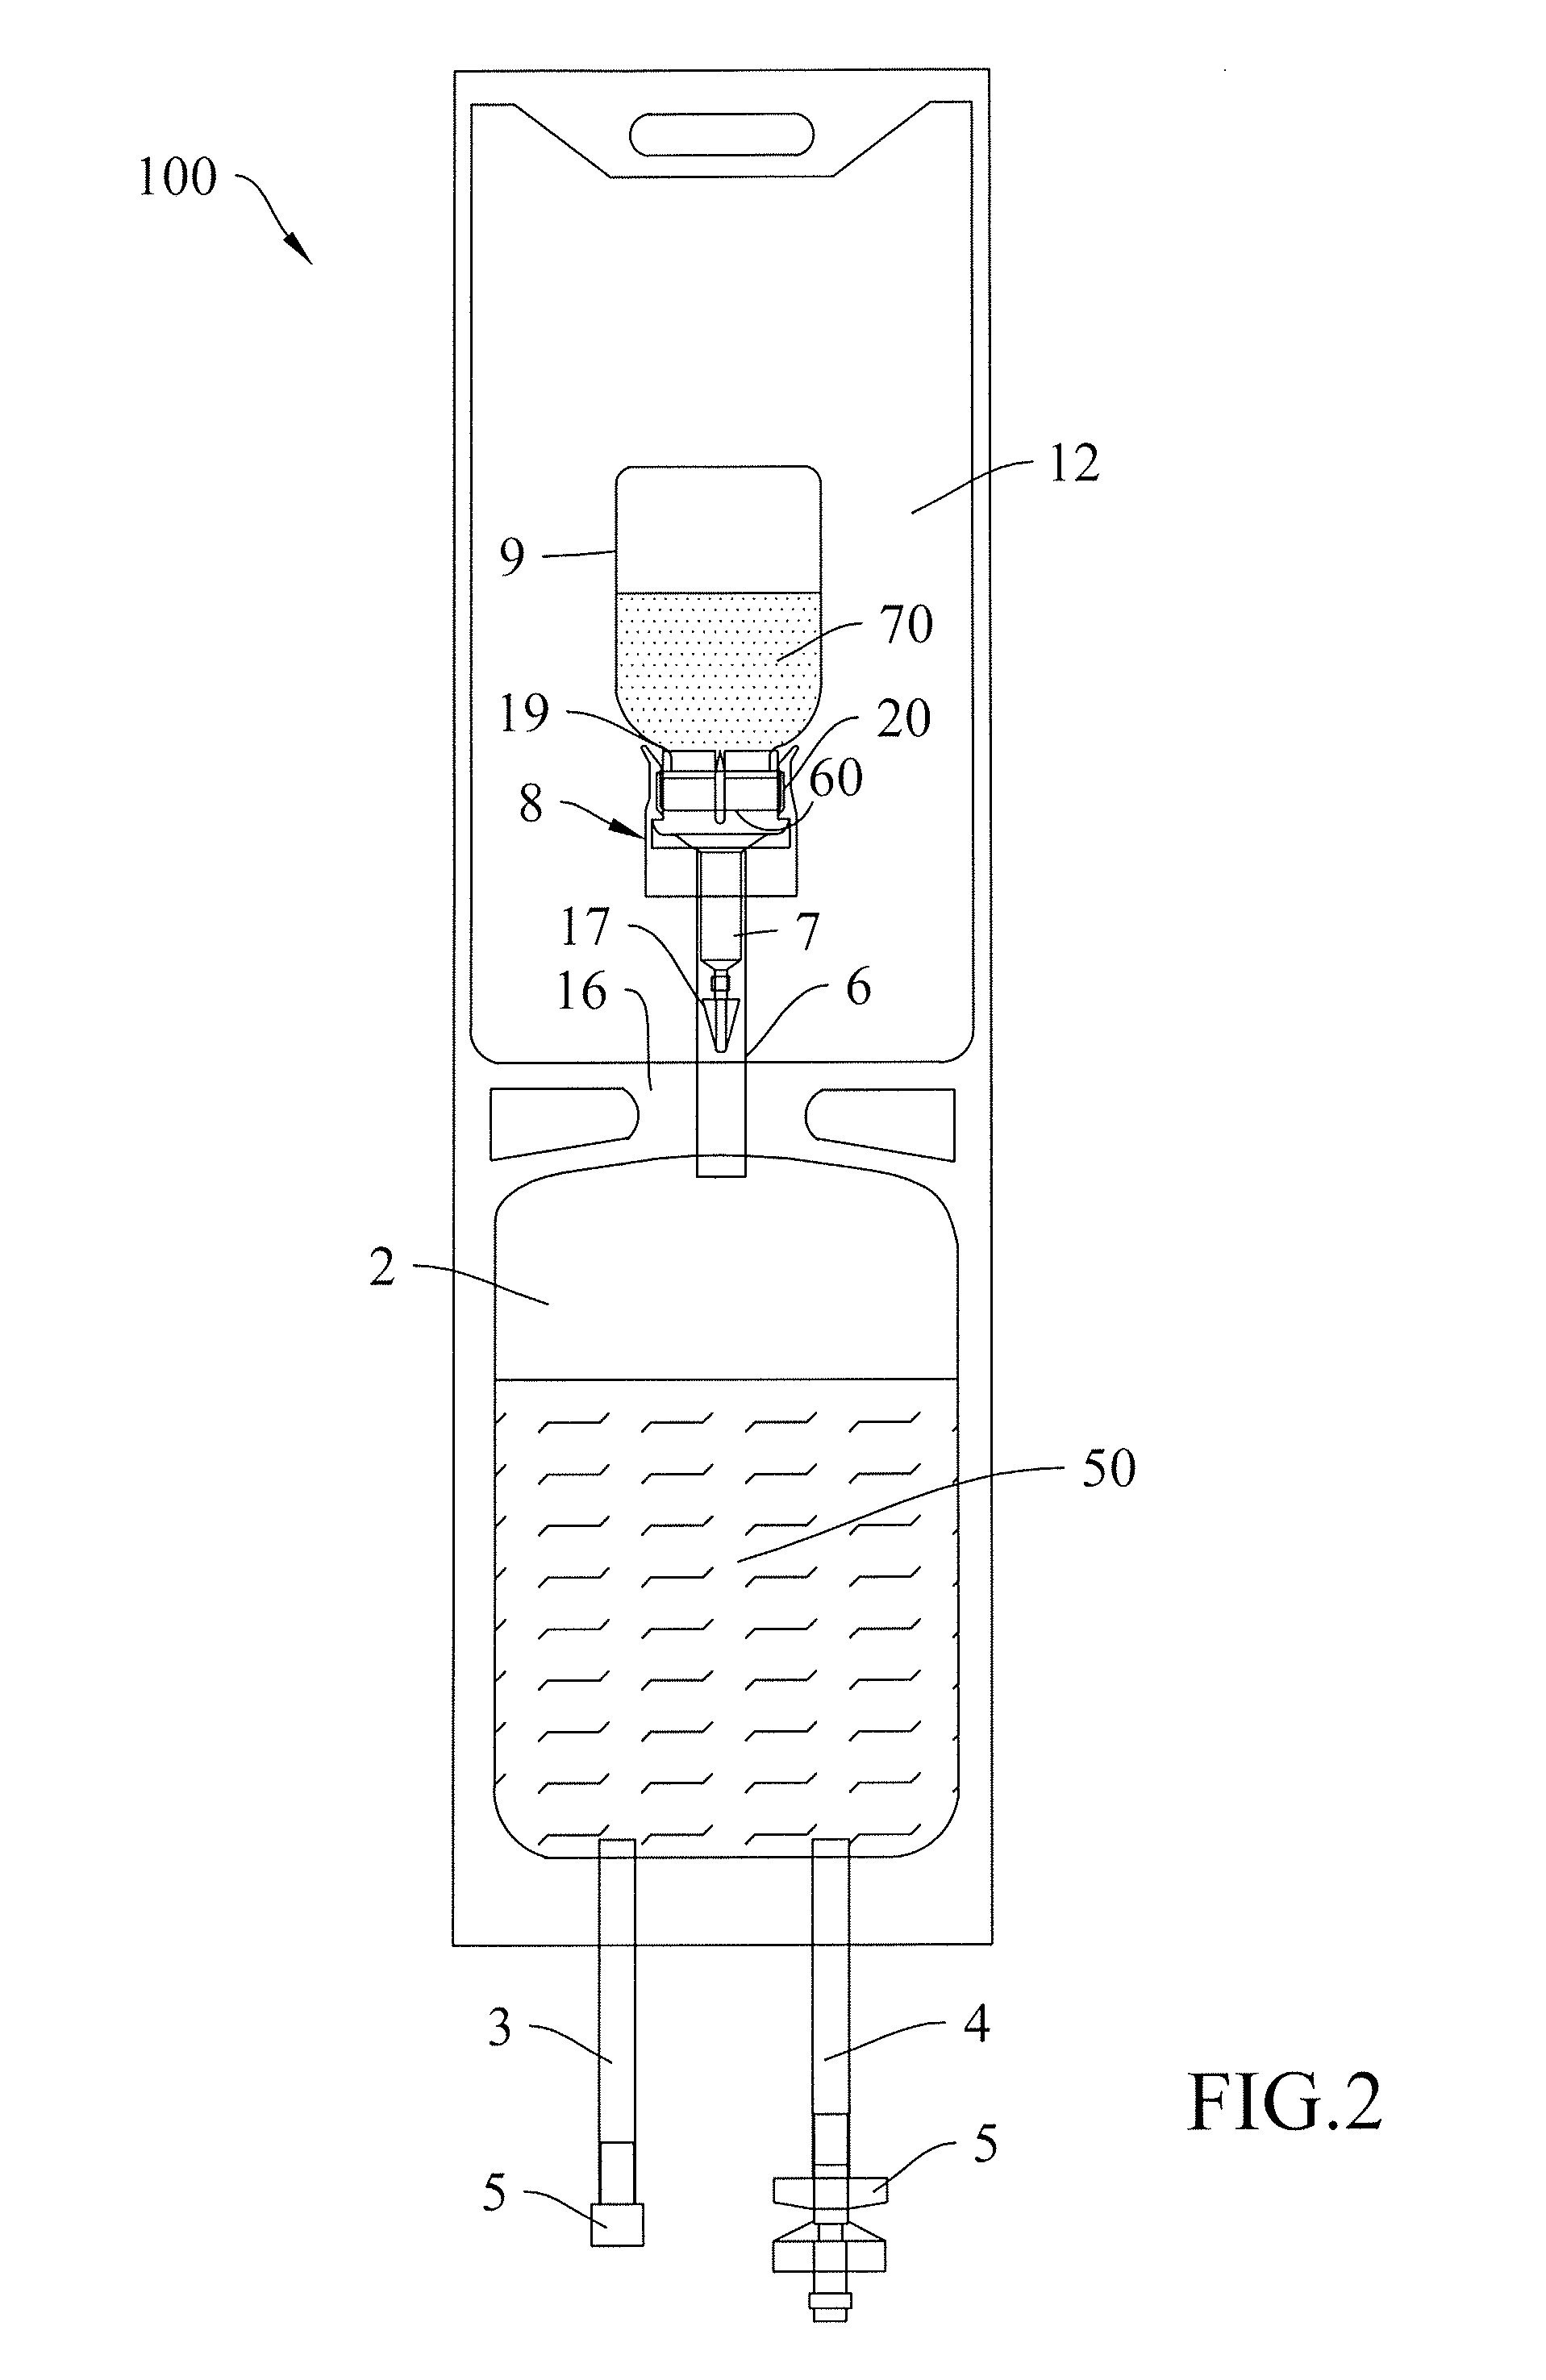 Flexible package with a sealed sterile chamber for the reconsitution and administration of fluid medicinal or nutritional substances instillable into the body of a patient